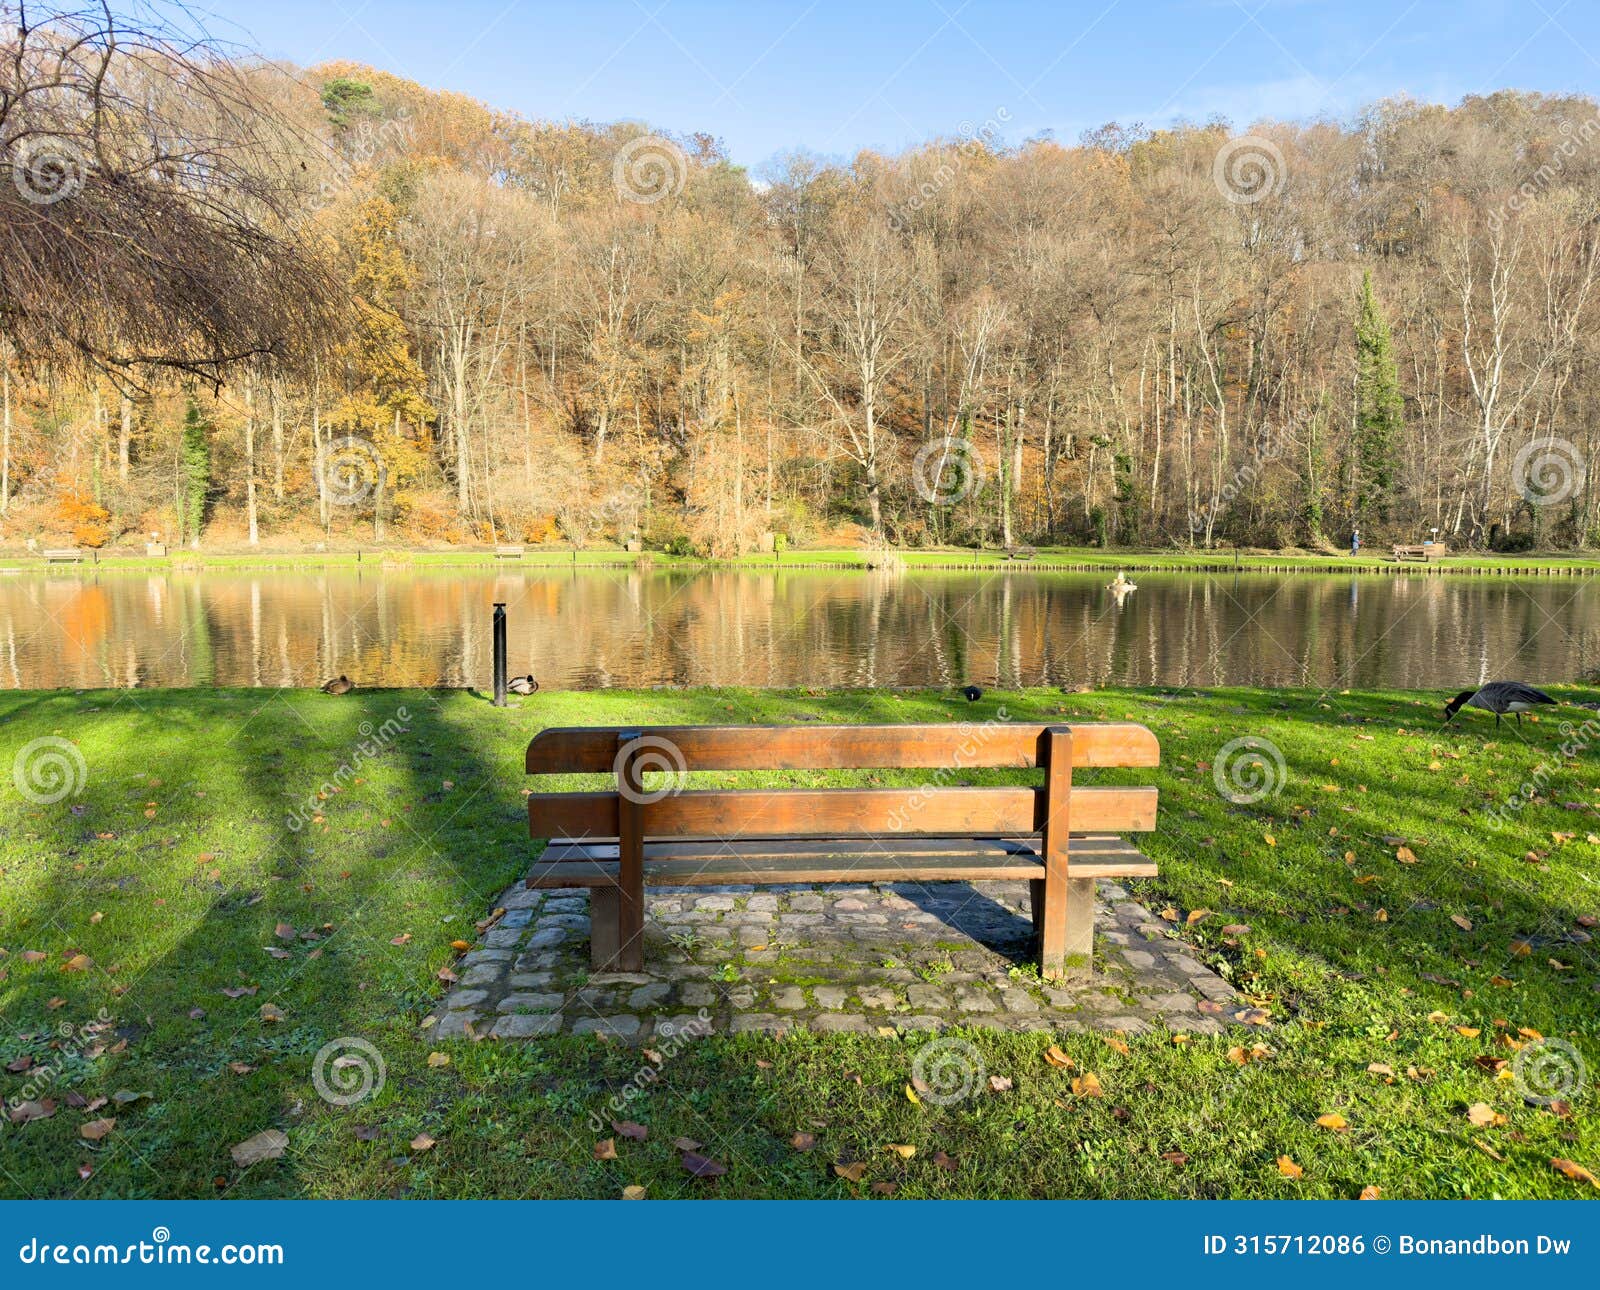 wooden bench in front of a lake in landscape park